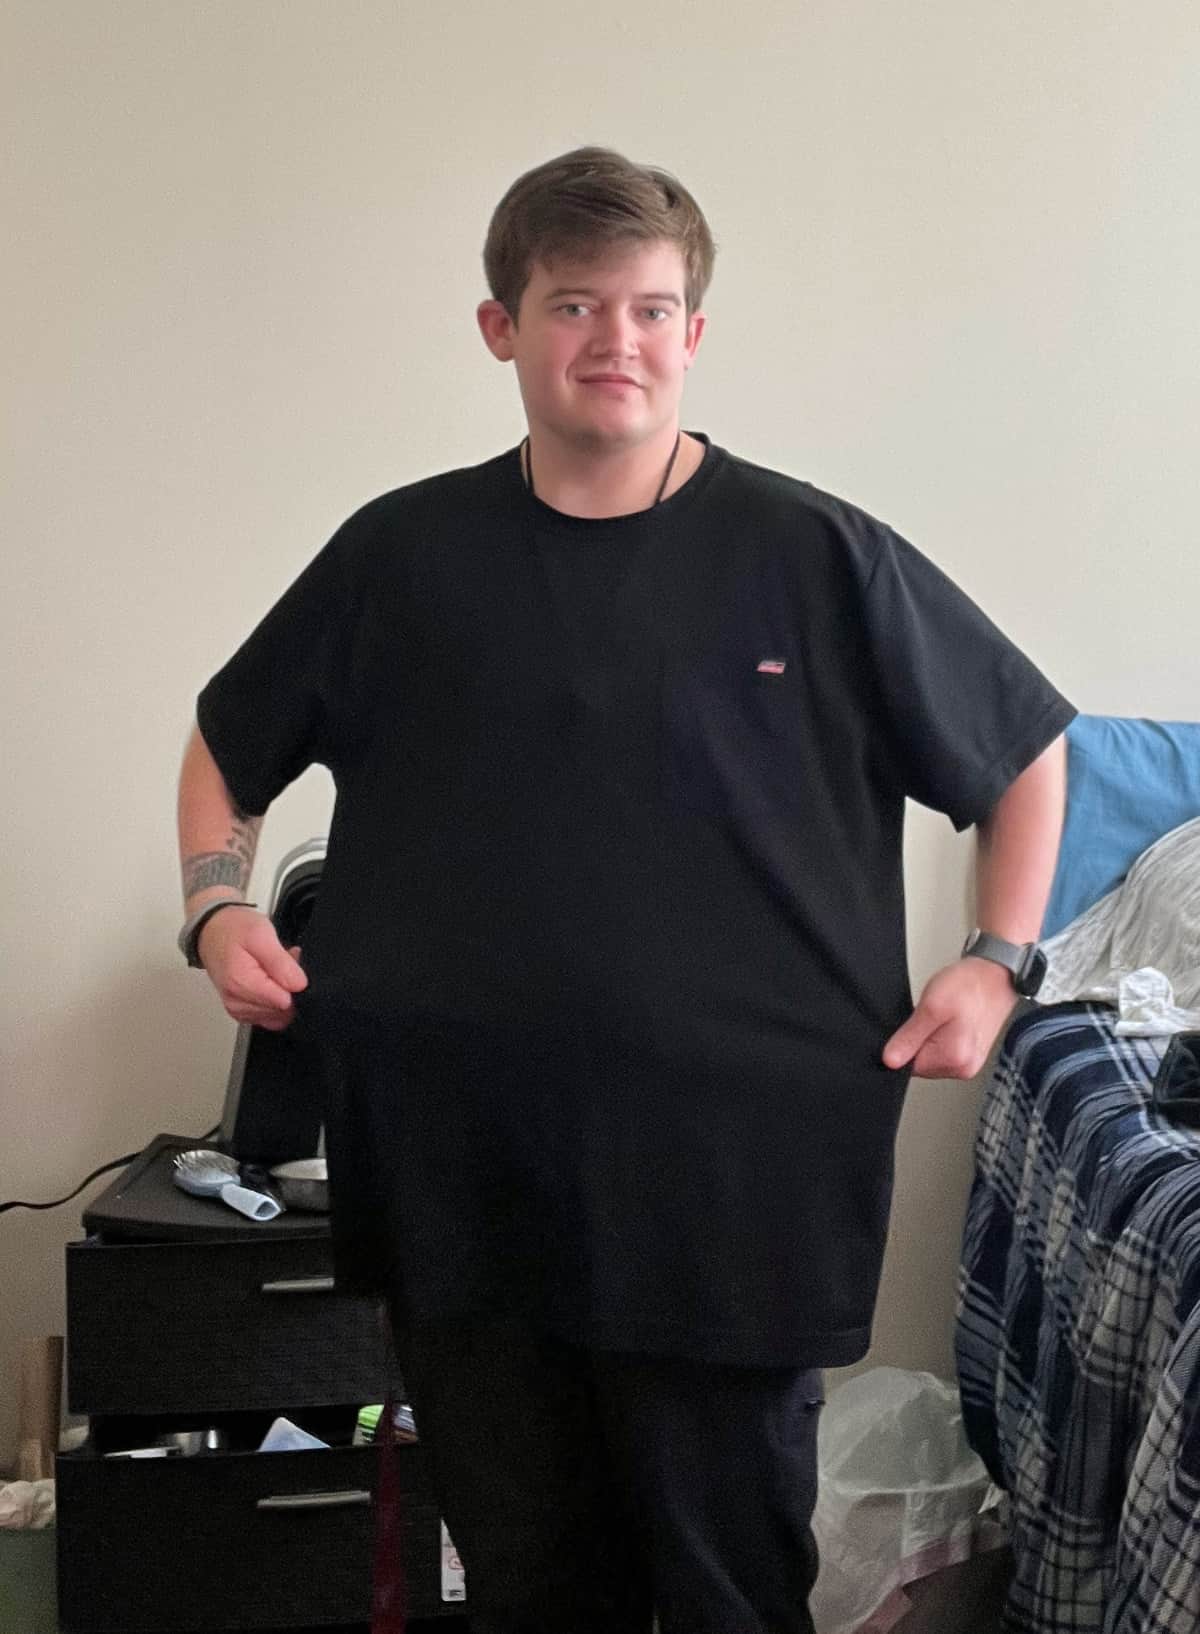 Matthew wearing XXL shirt and showing off his 67 pound weight loss.